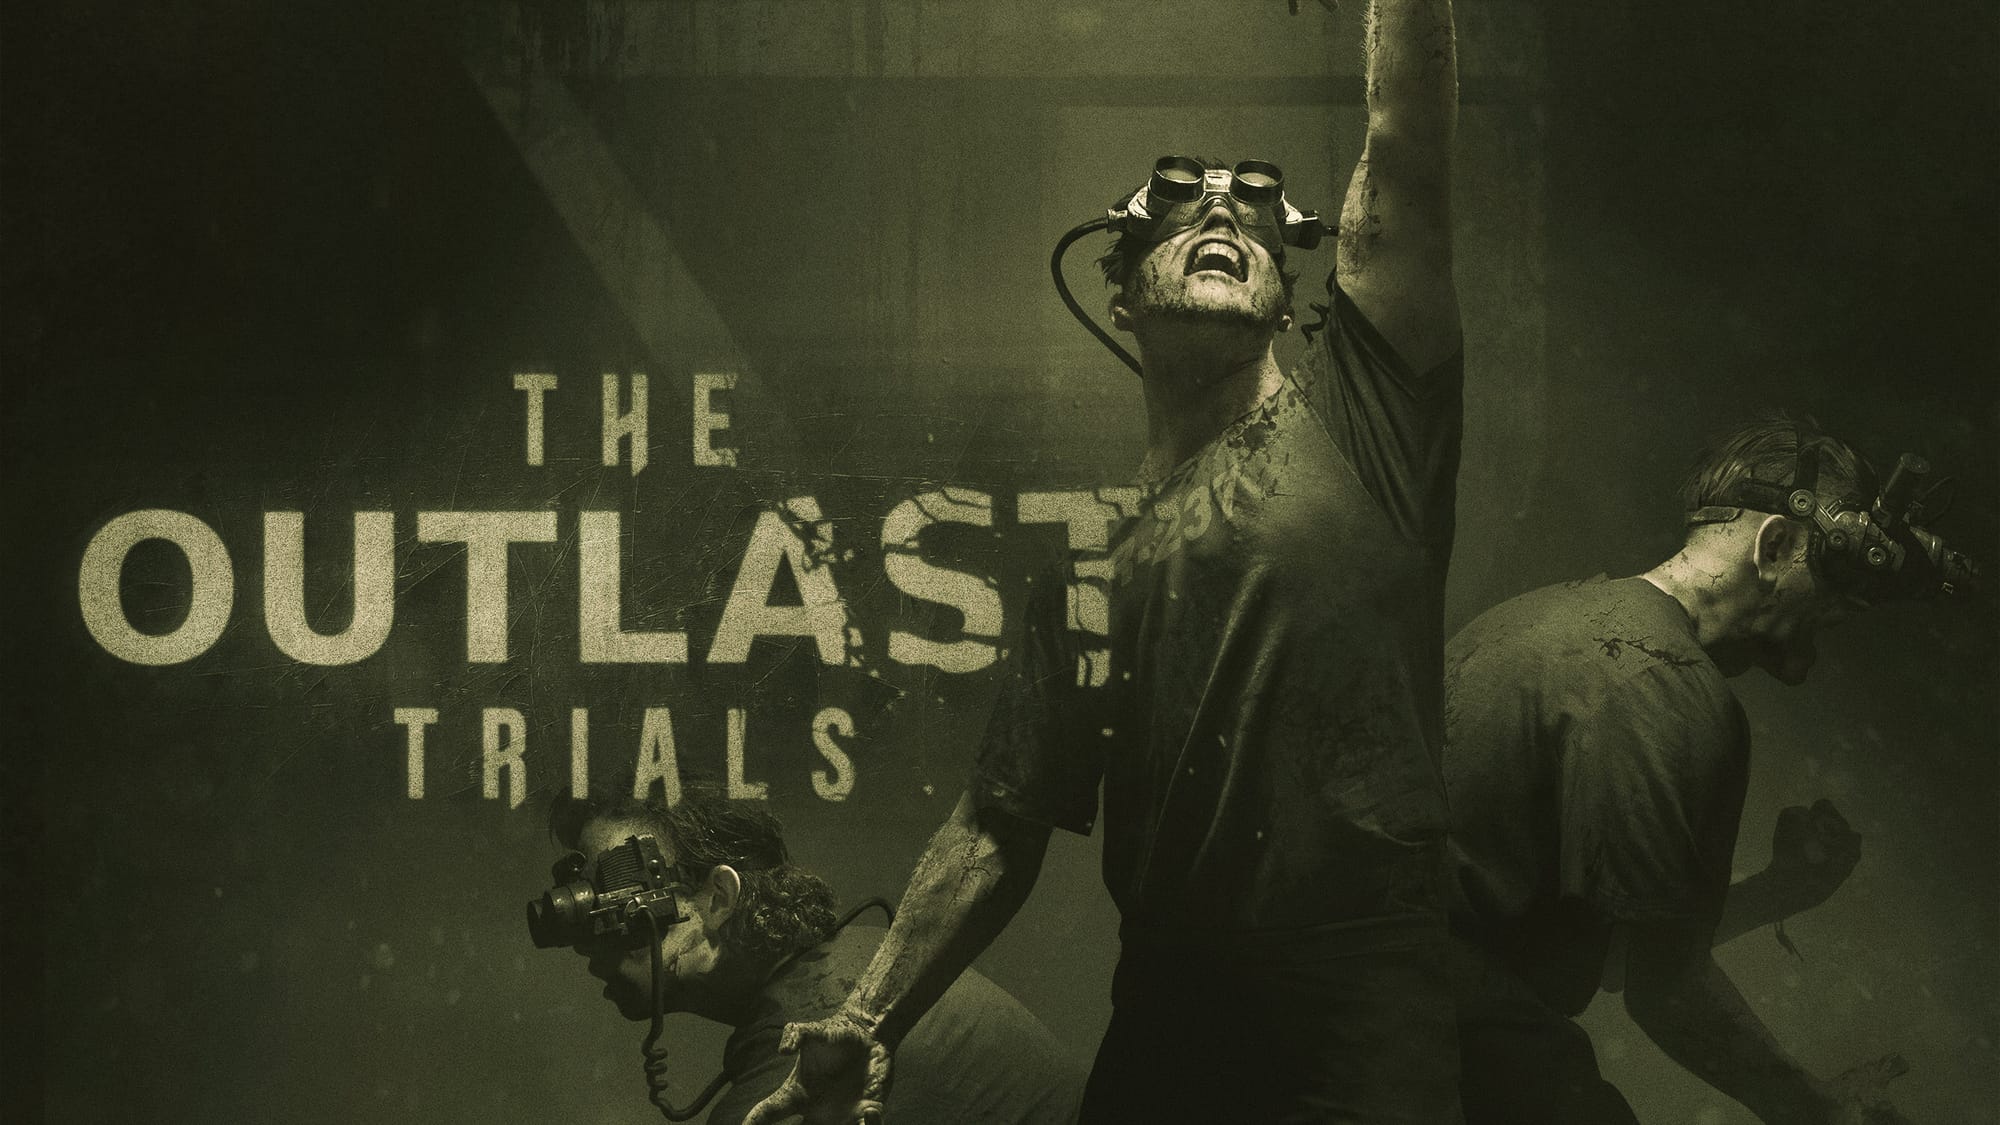 The Trials are coming to Consoles! The Outlast Trials